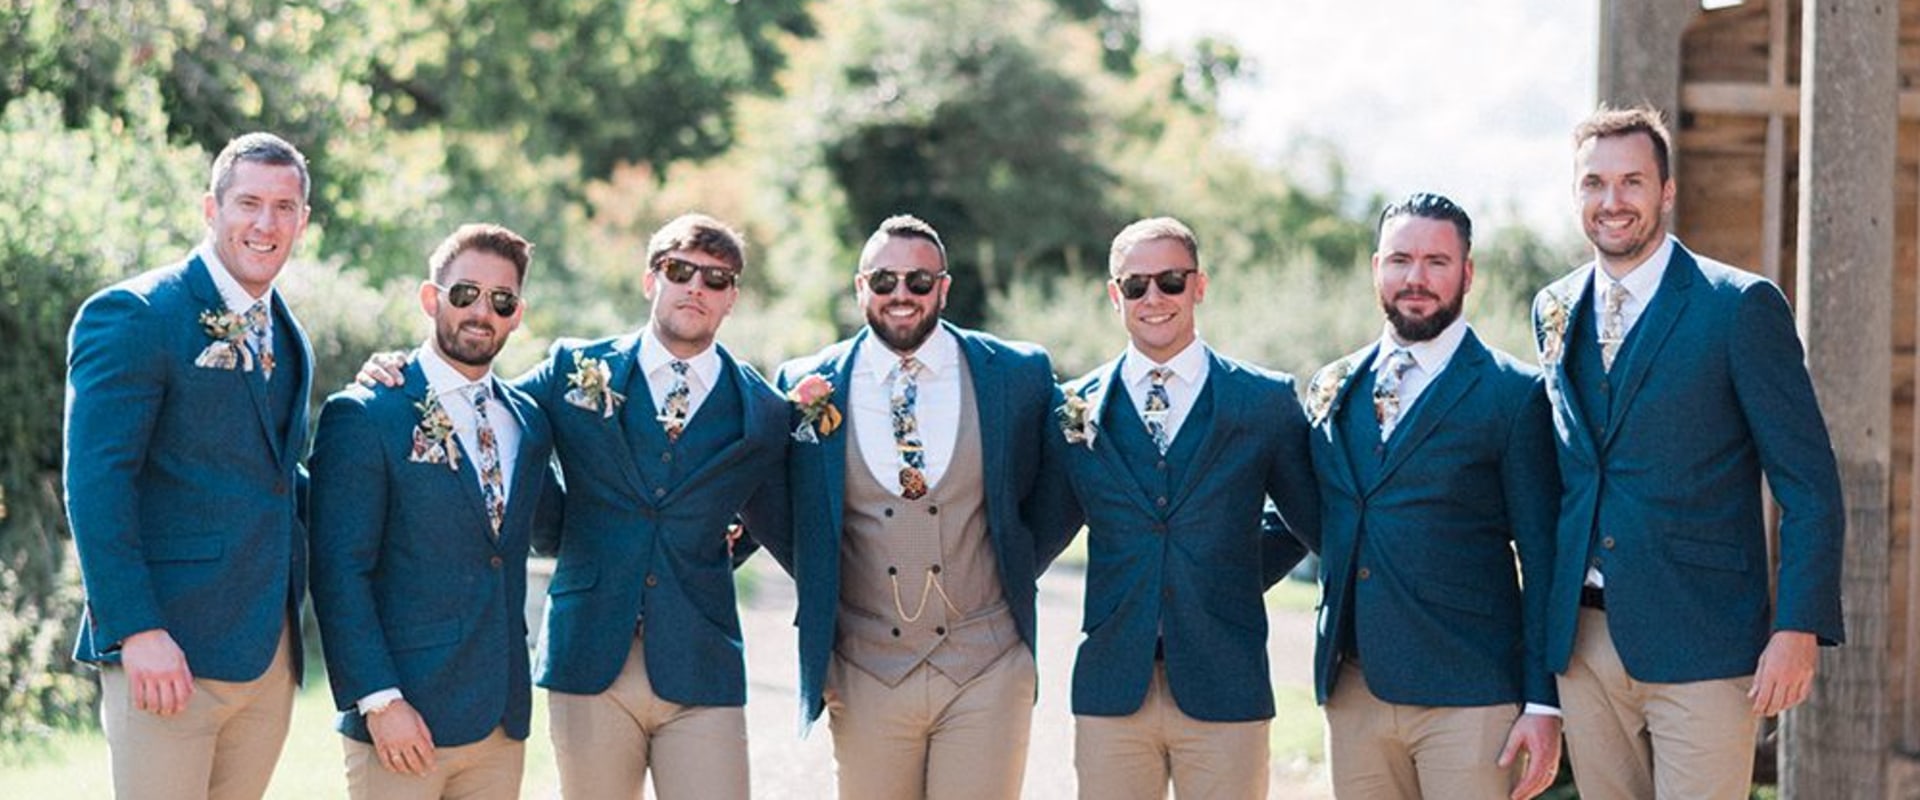 Casual Wedding Attire: Tips and Inspiration for Grooms